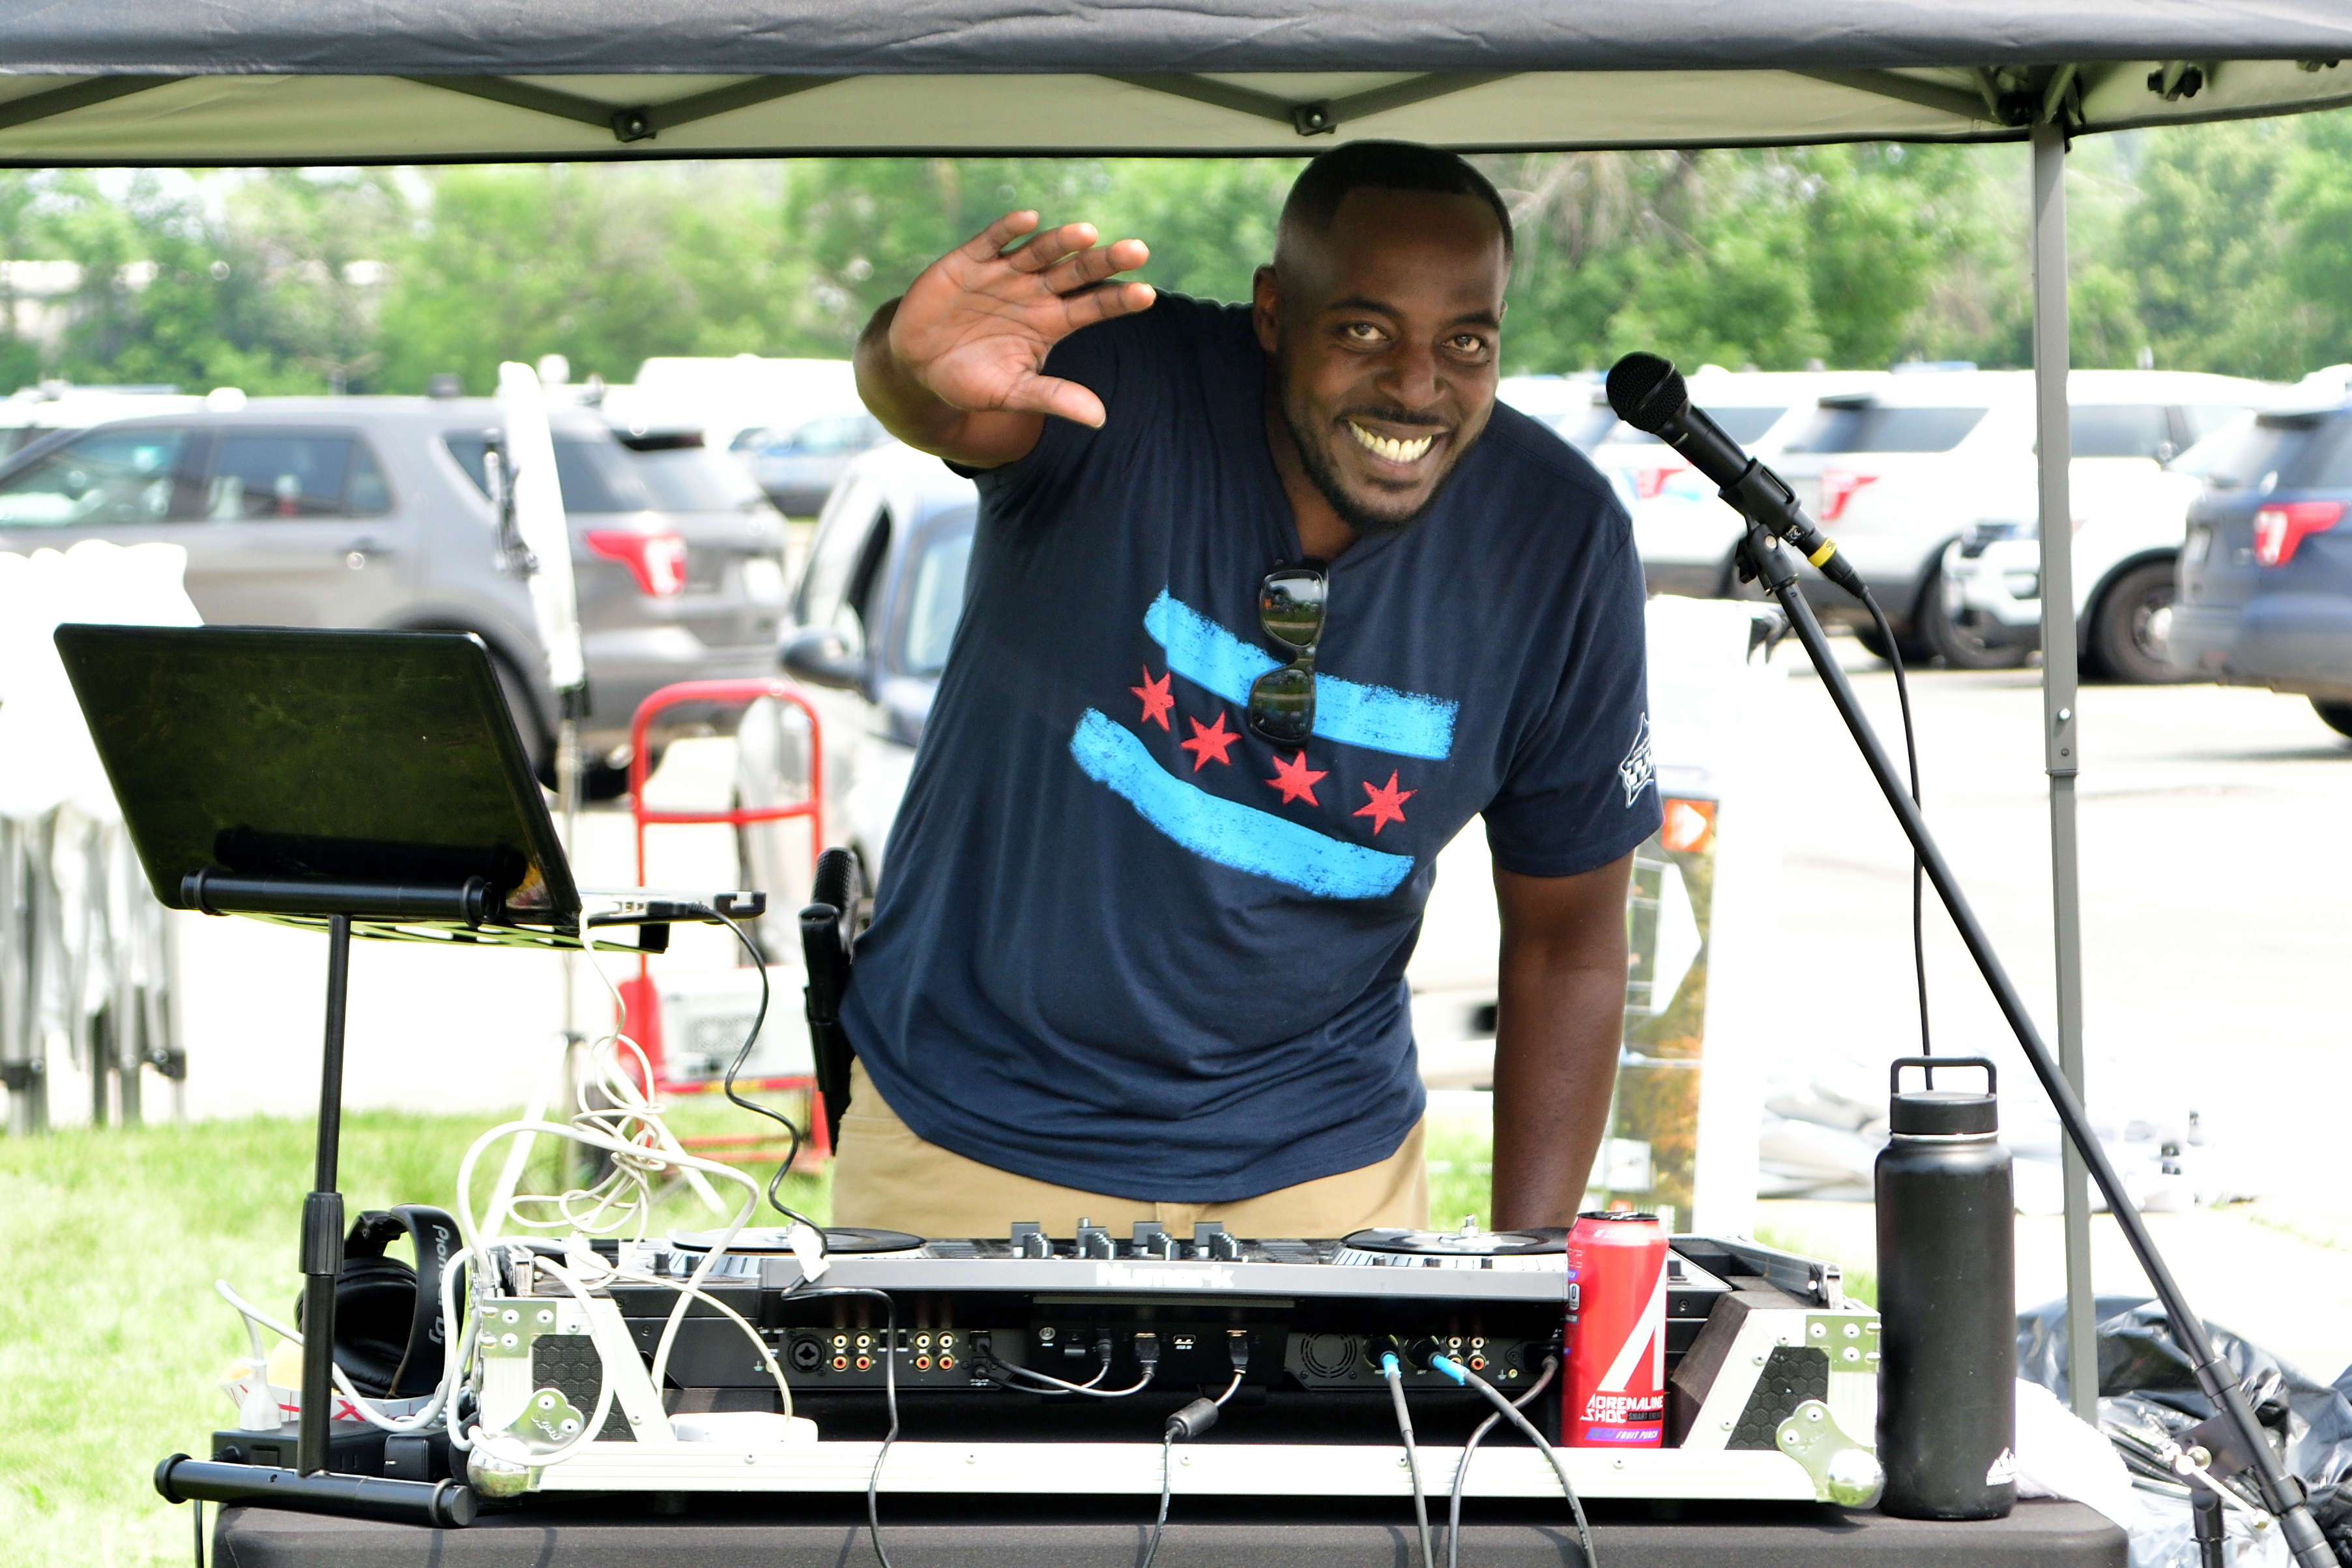 the DJ, Community Festival 2021, 5th District Chicago Police Headquarters, July 17, 2021 (pic by Emi Yamamoto)